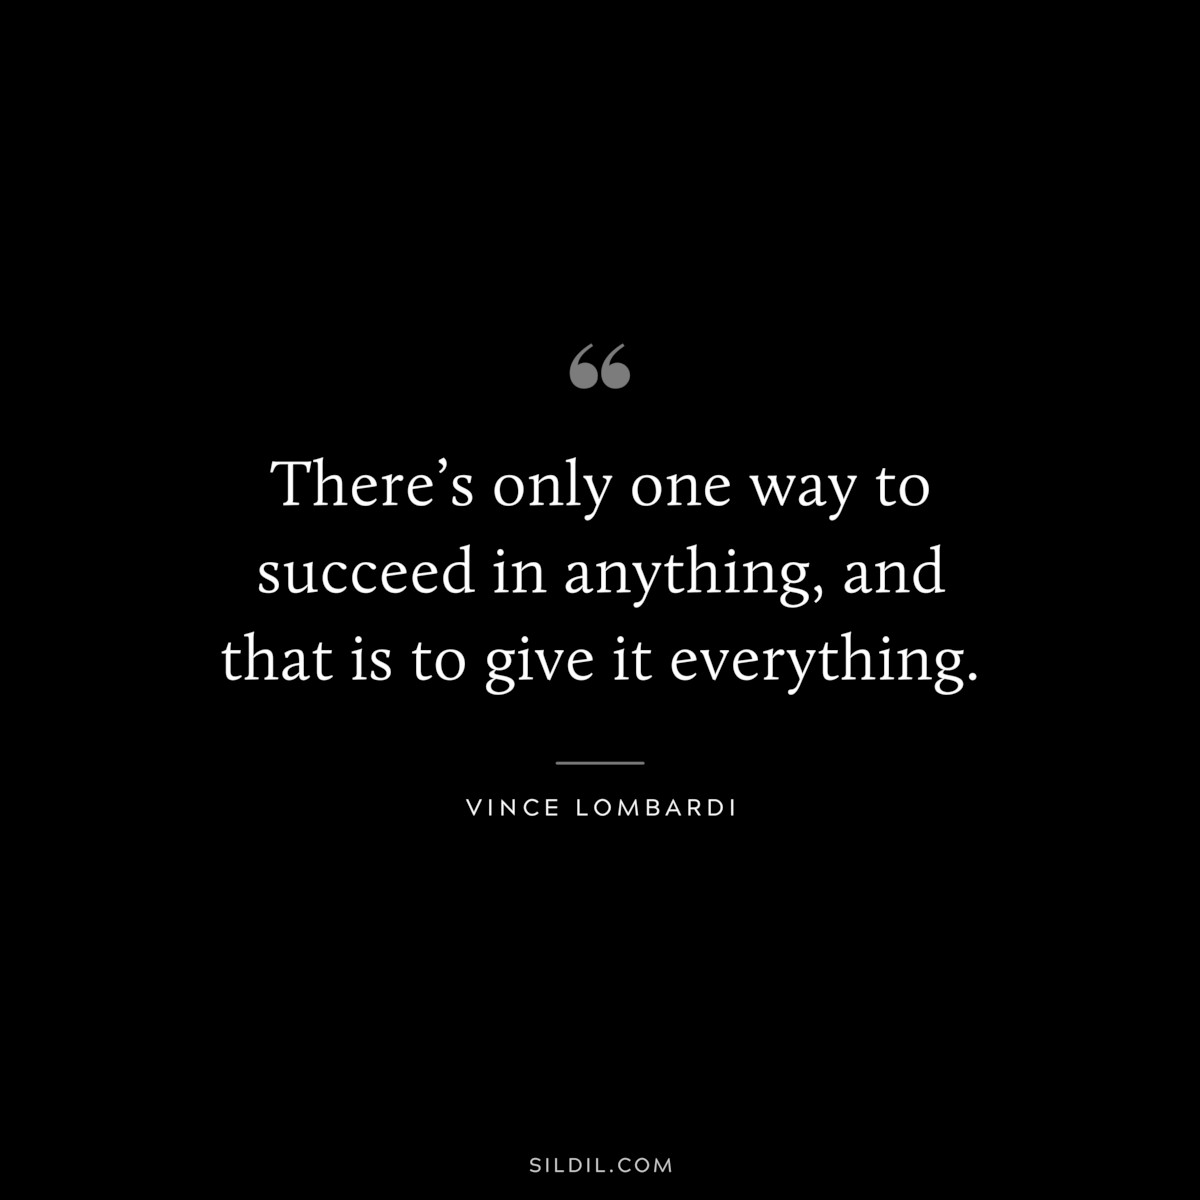 There’s only one way to succeed in anything, and that is to give it everything. ― Vince Lombardi